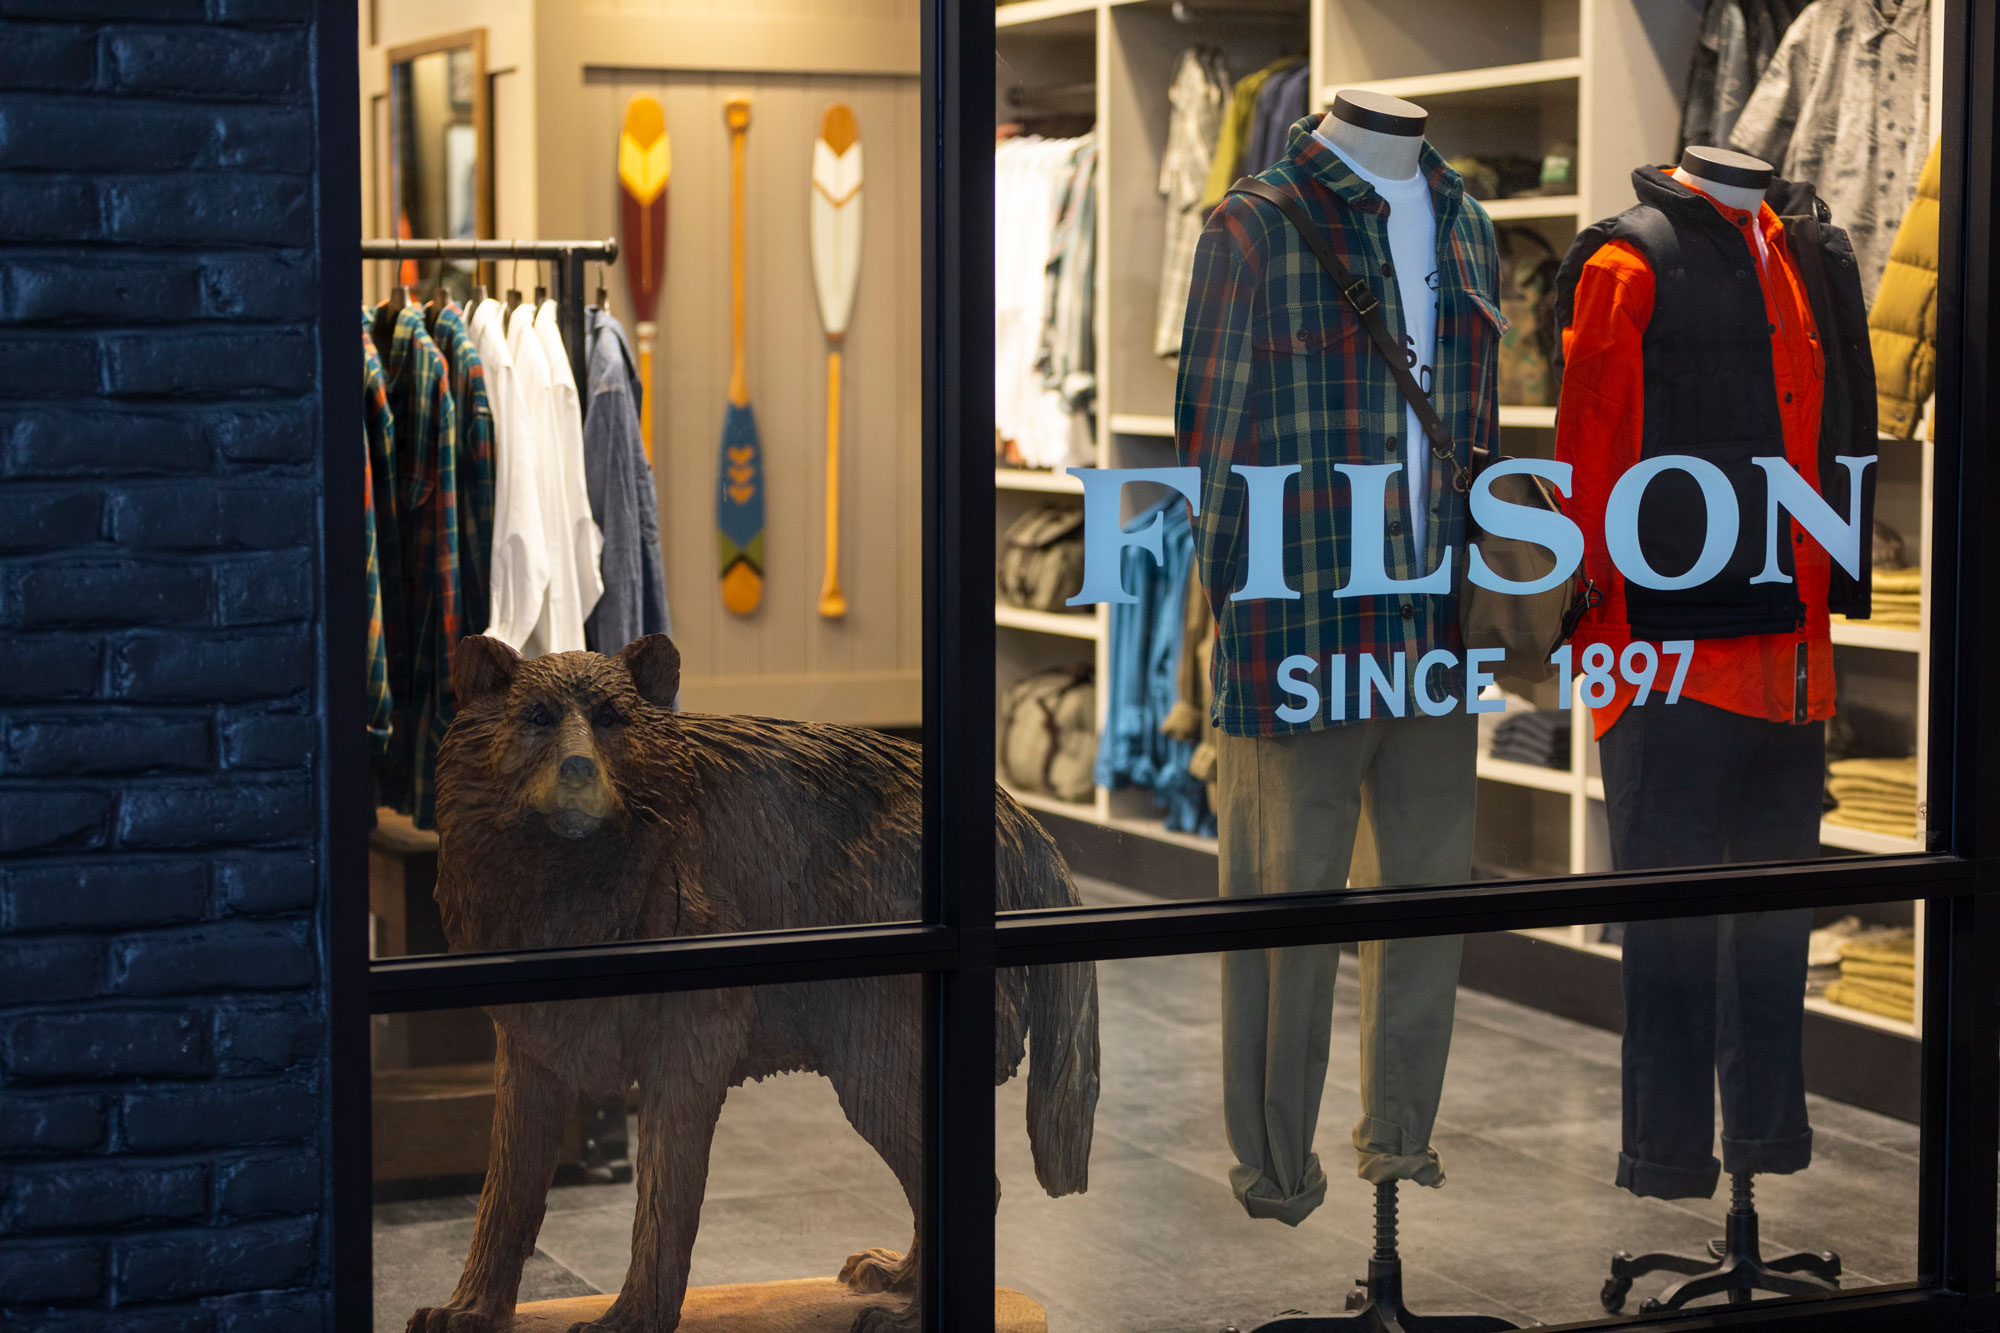 Filson window shopping with mannequins and bear